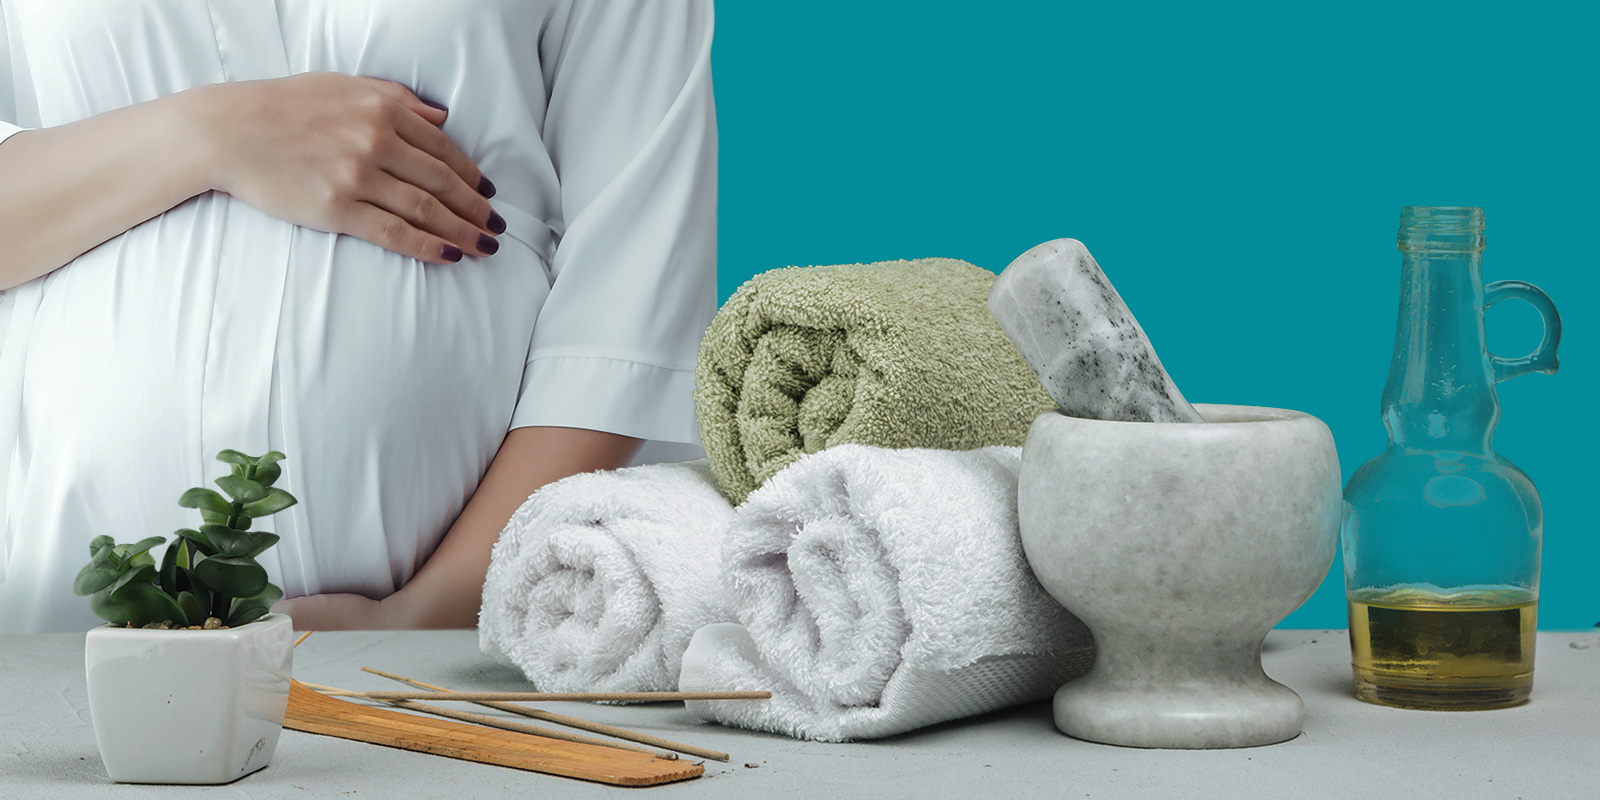 Moroccan Bath for Pregnant Women: Is it Safe?